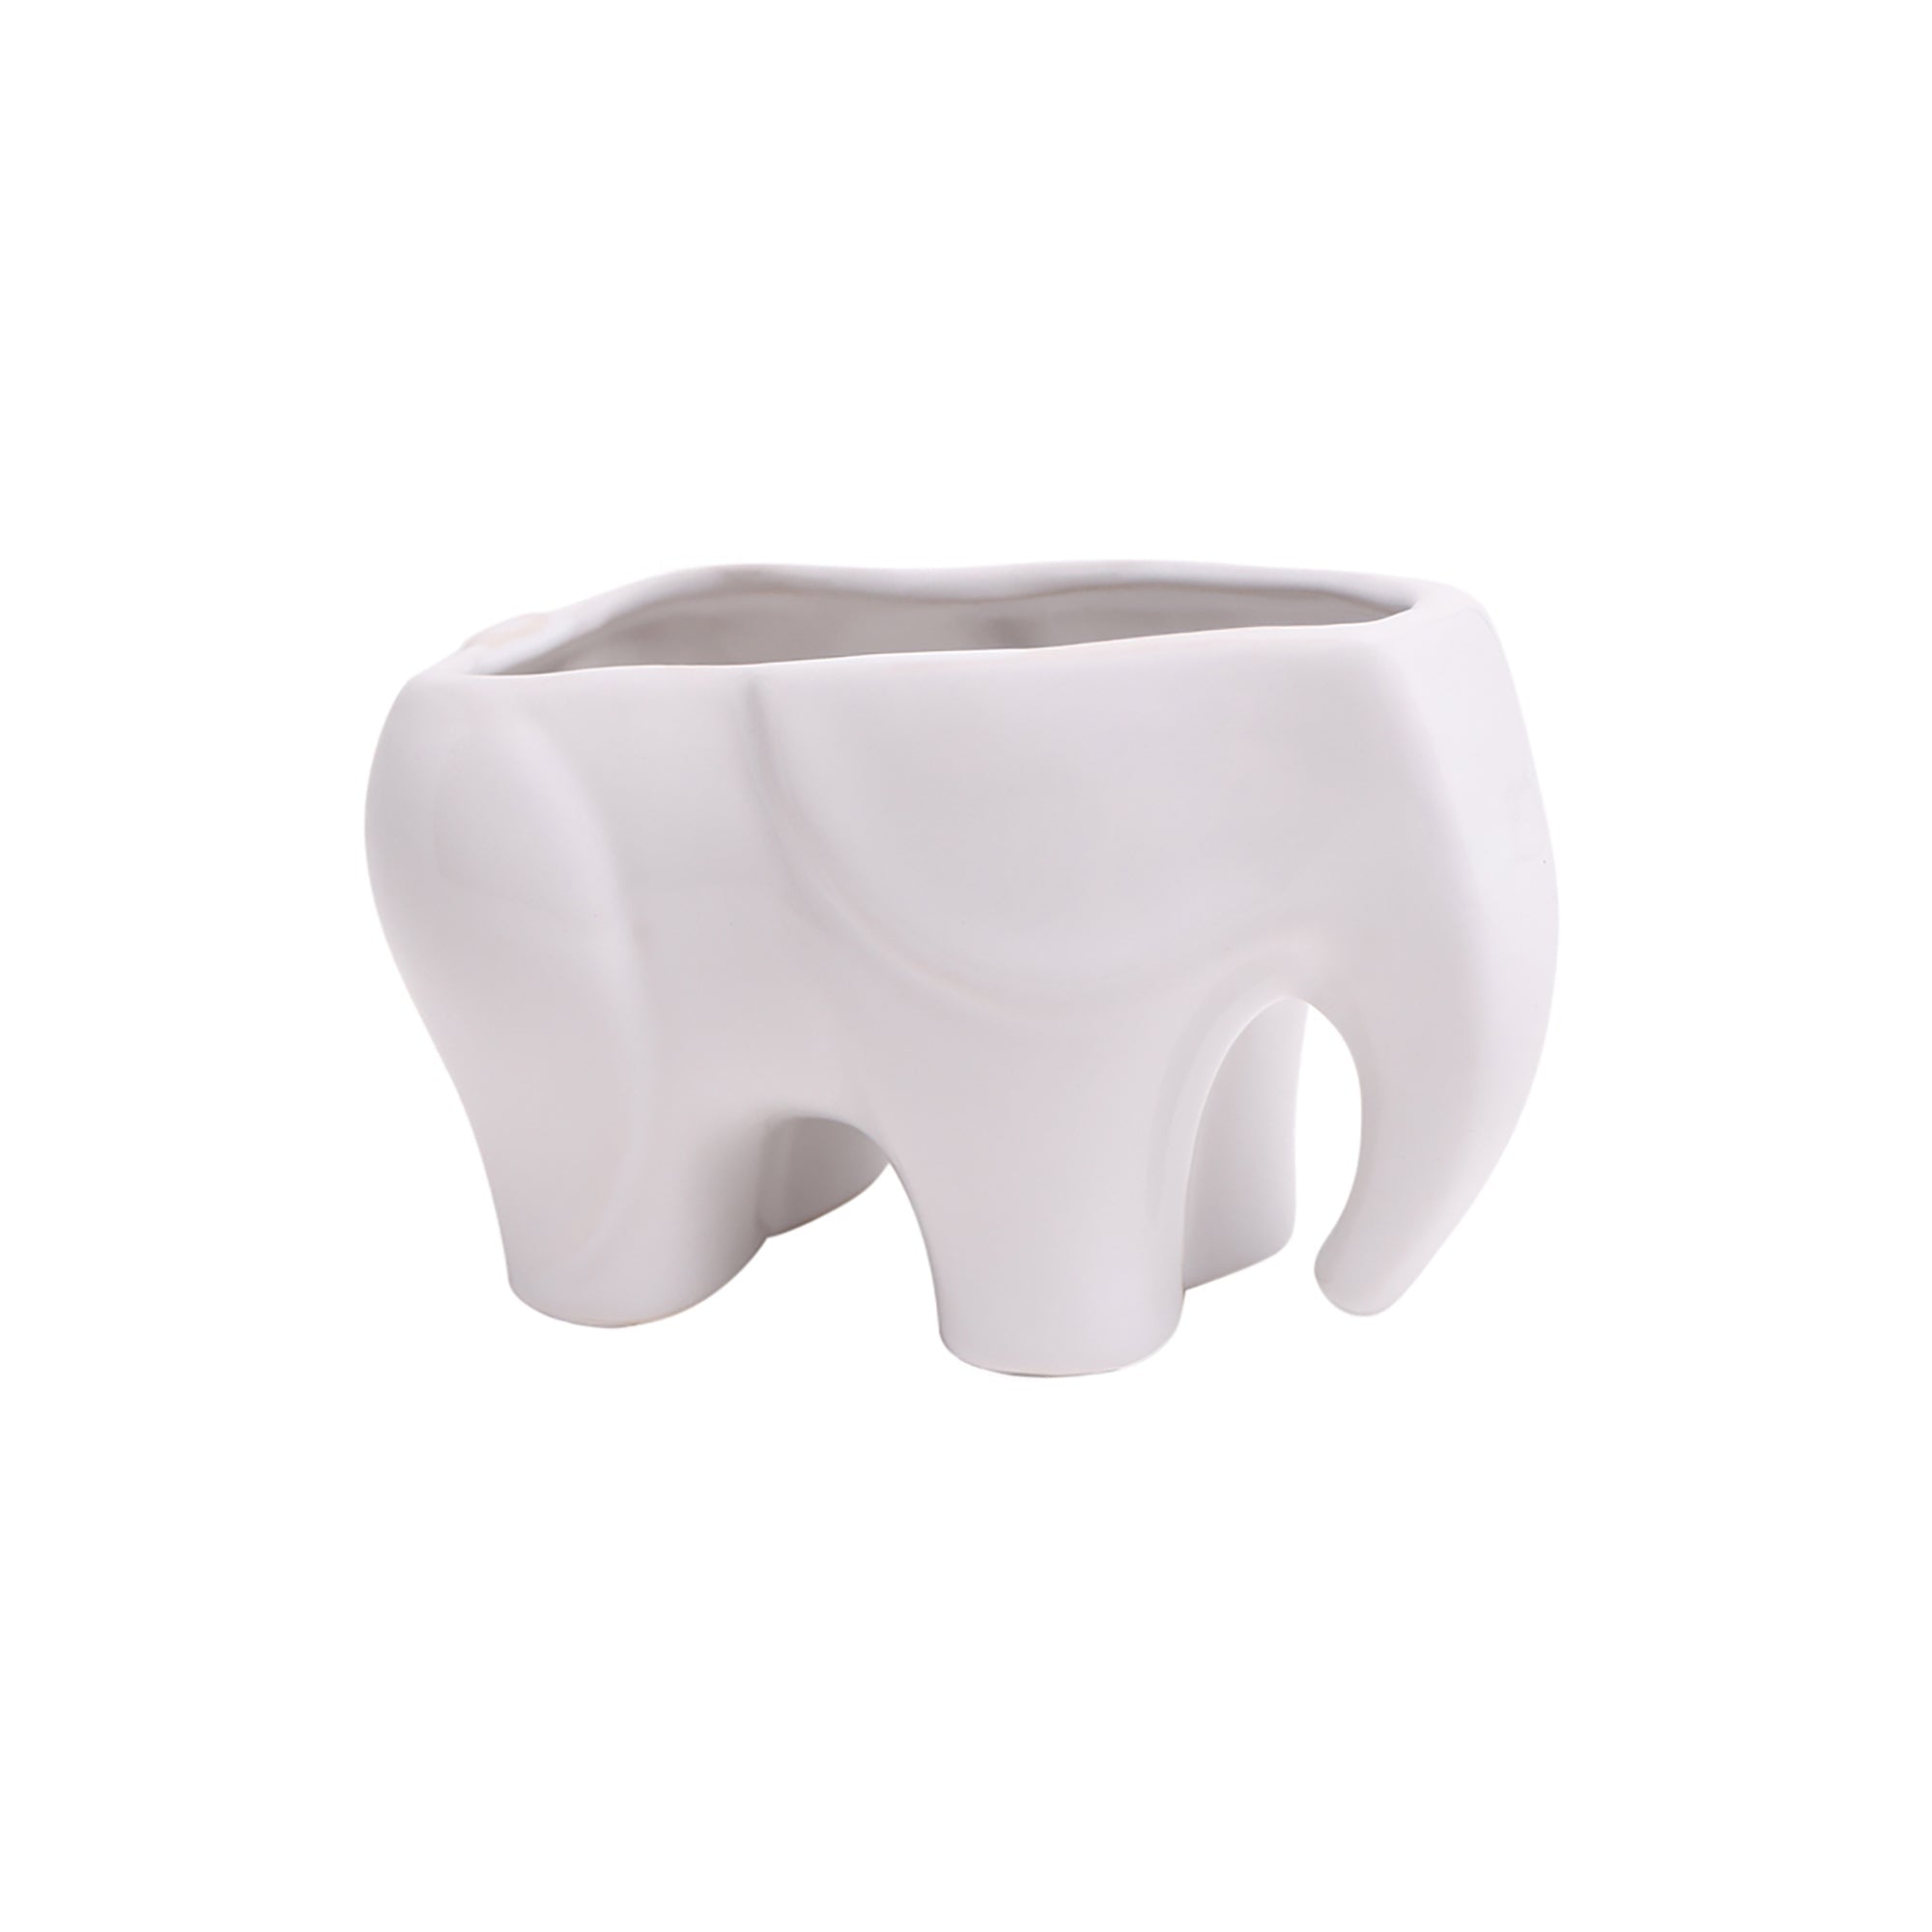 A white ceramic planter in the shape of a sad elephant, isolated on a white background. The Elephant Ceramic Indoor Plant Pot For Succulents hollow in the elephant's back is intended for holding a plant.